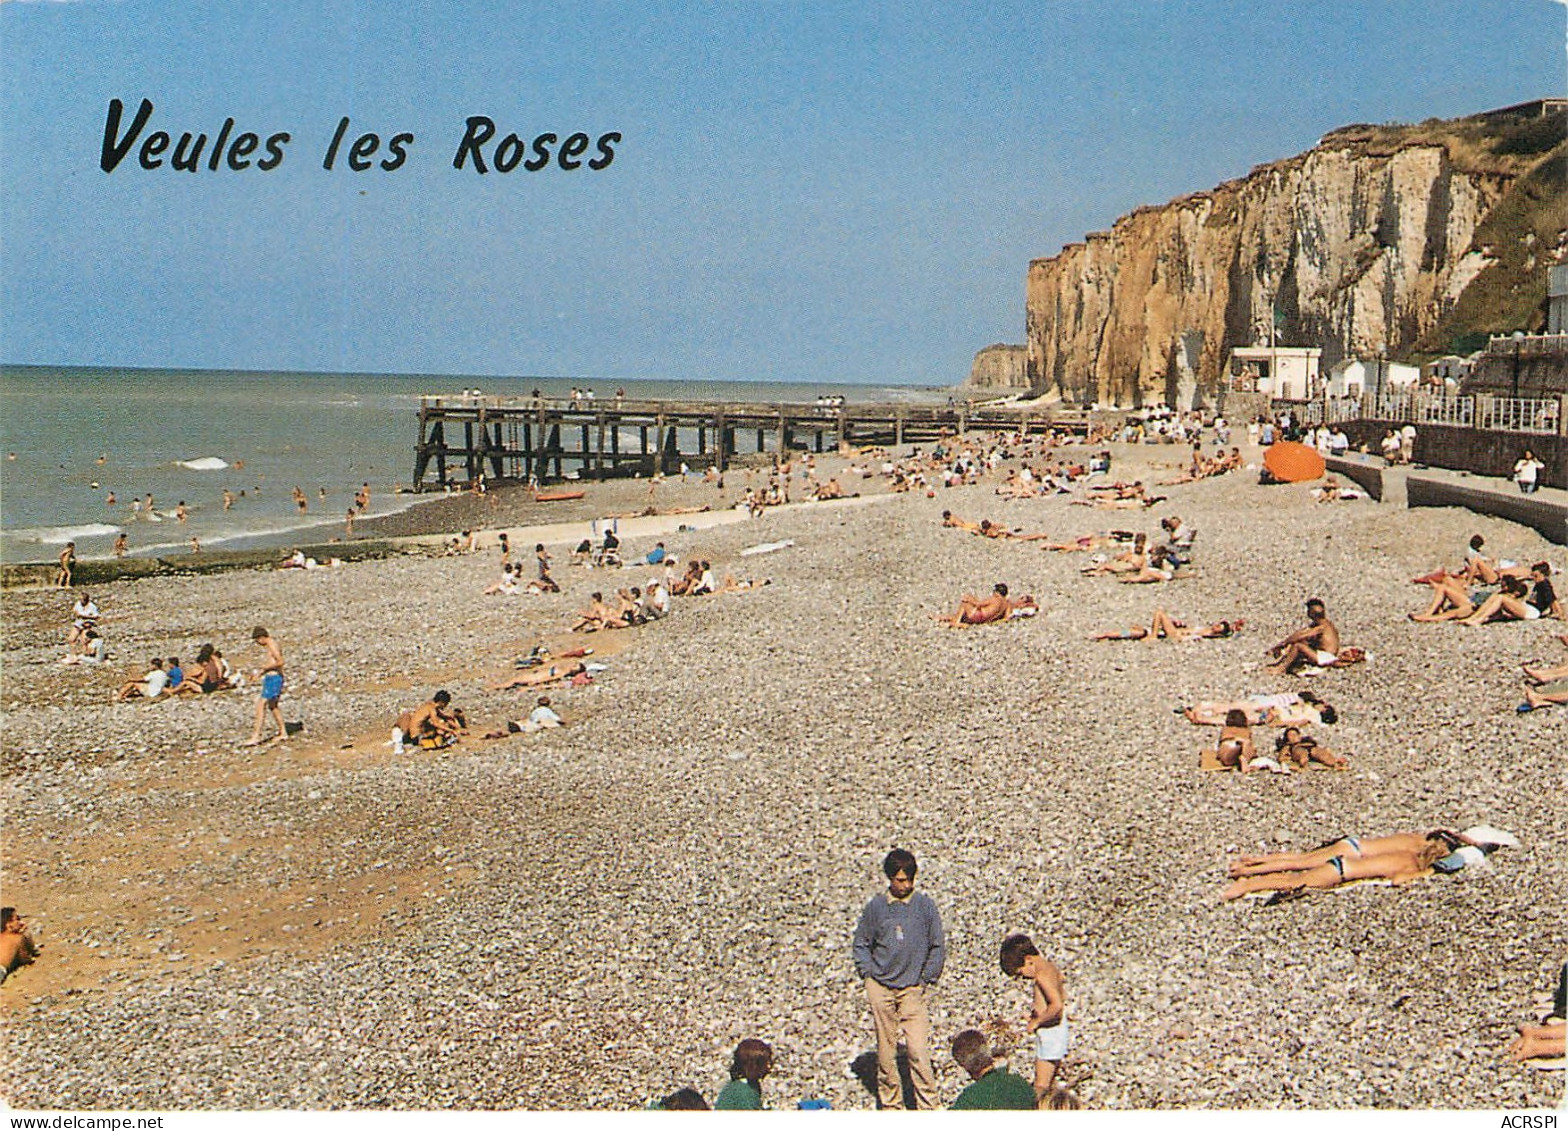 VEULES LES ROSES La Plage Agreable Station Balneaire 17(scan Recto-verso) MD2517 - Veules Les Roses